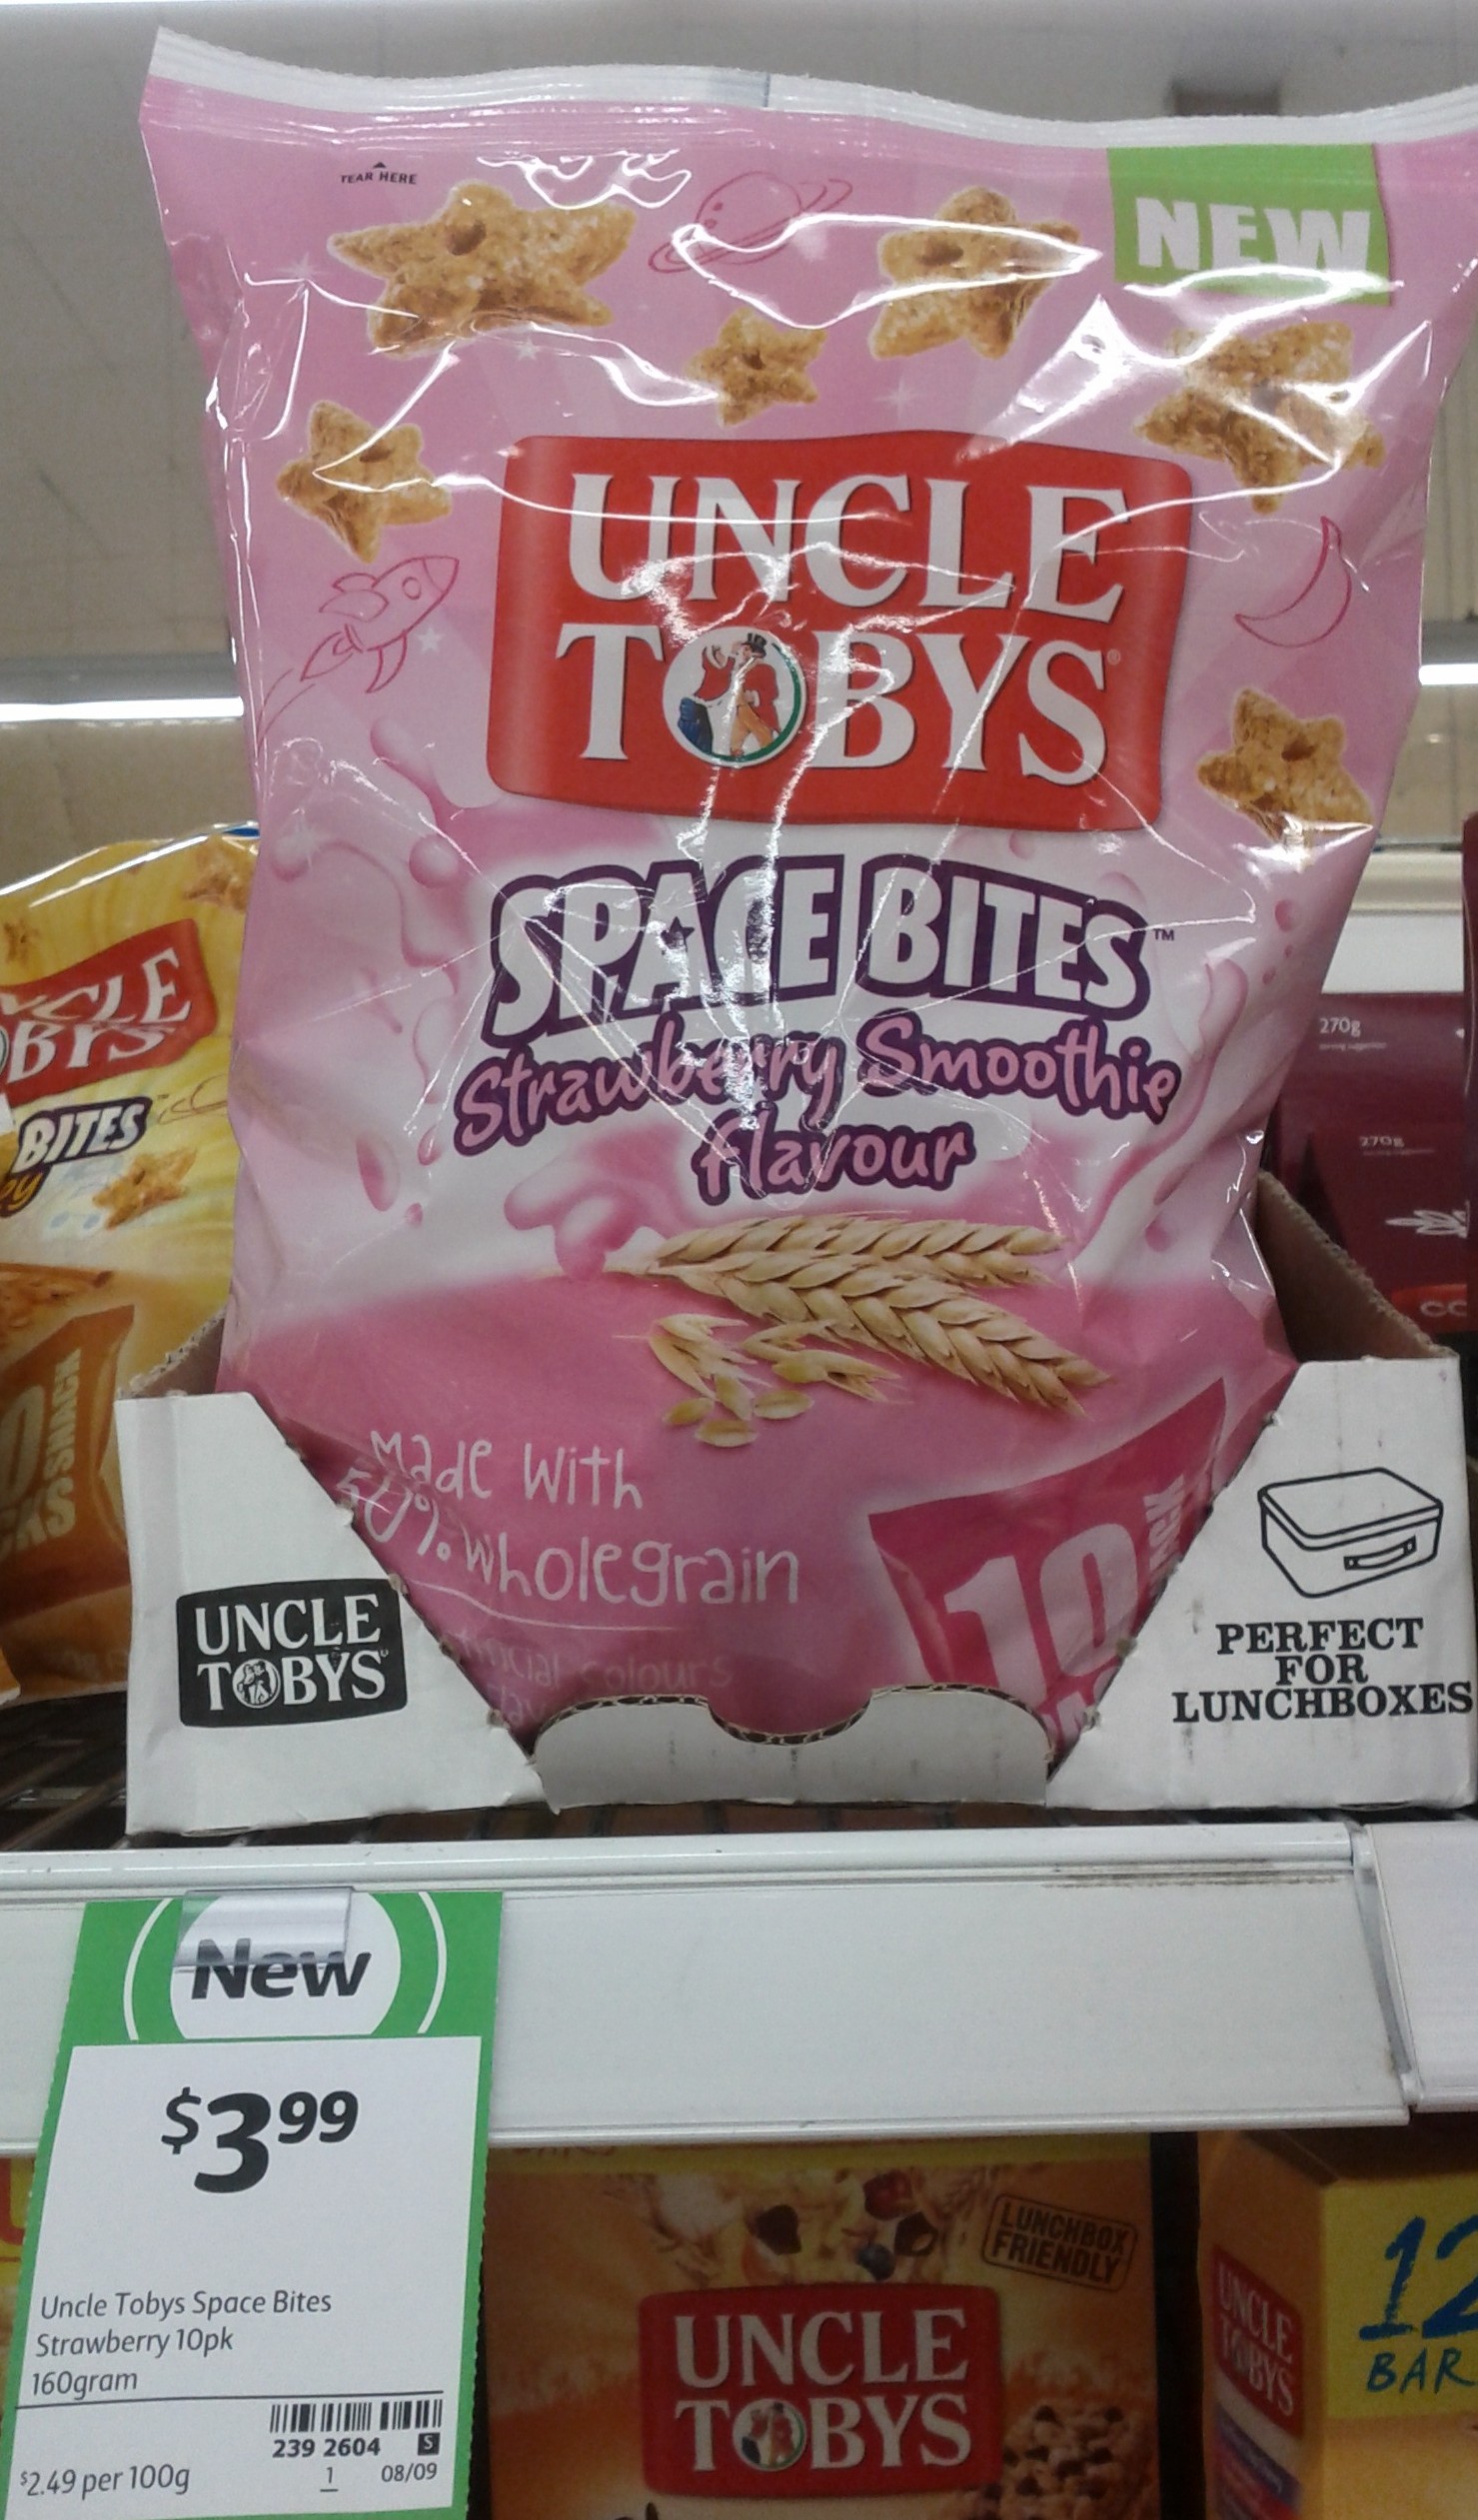 Uncle Tobys 160g Space Bites Strawberry Smoothie Flavour